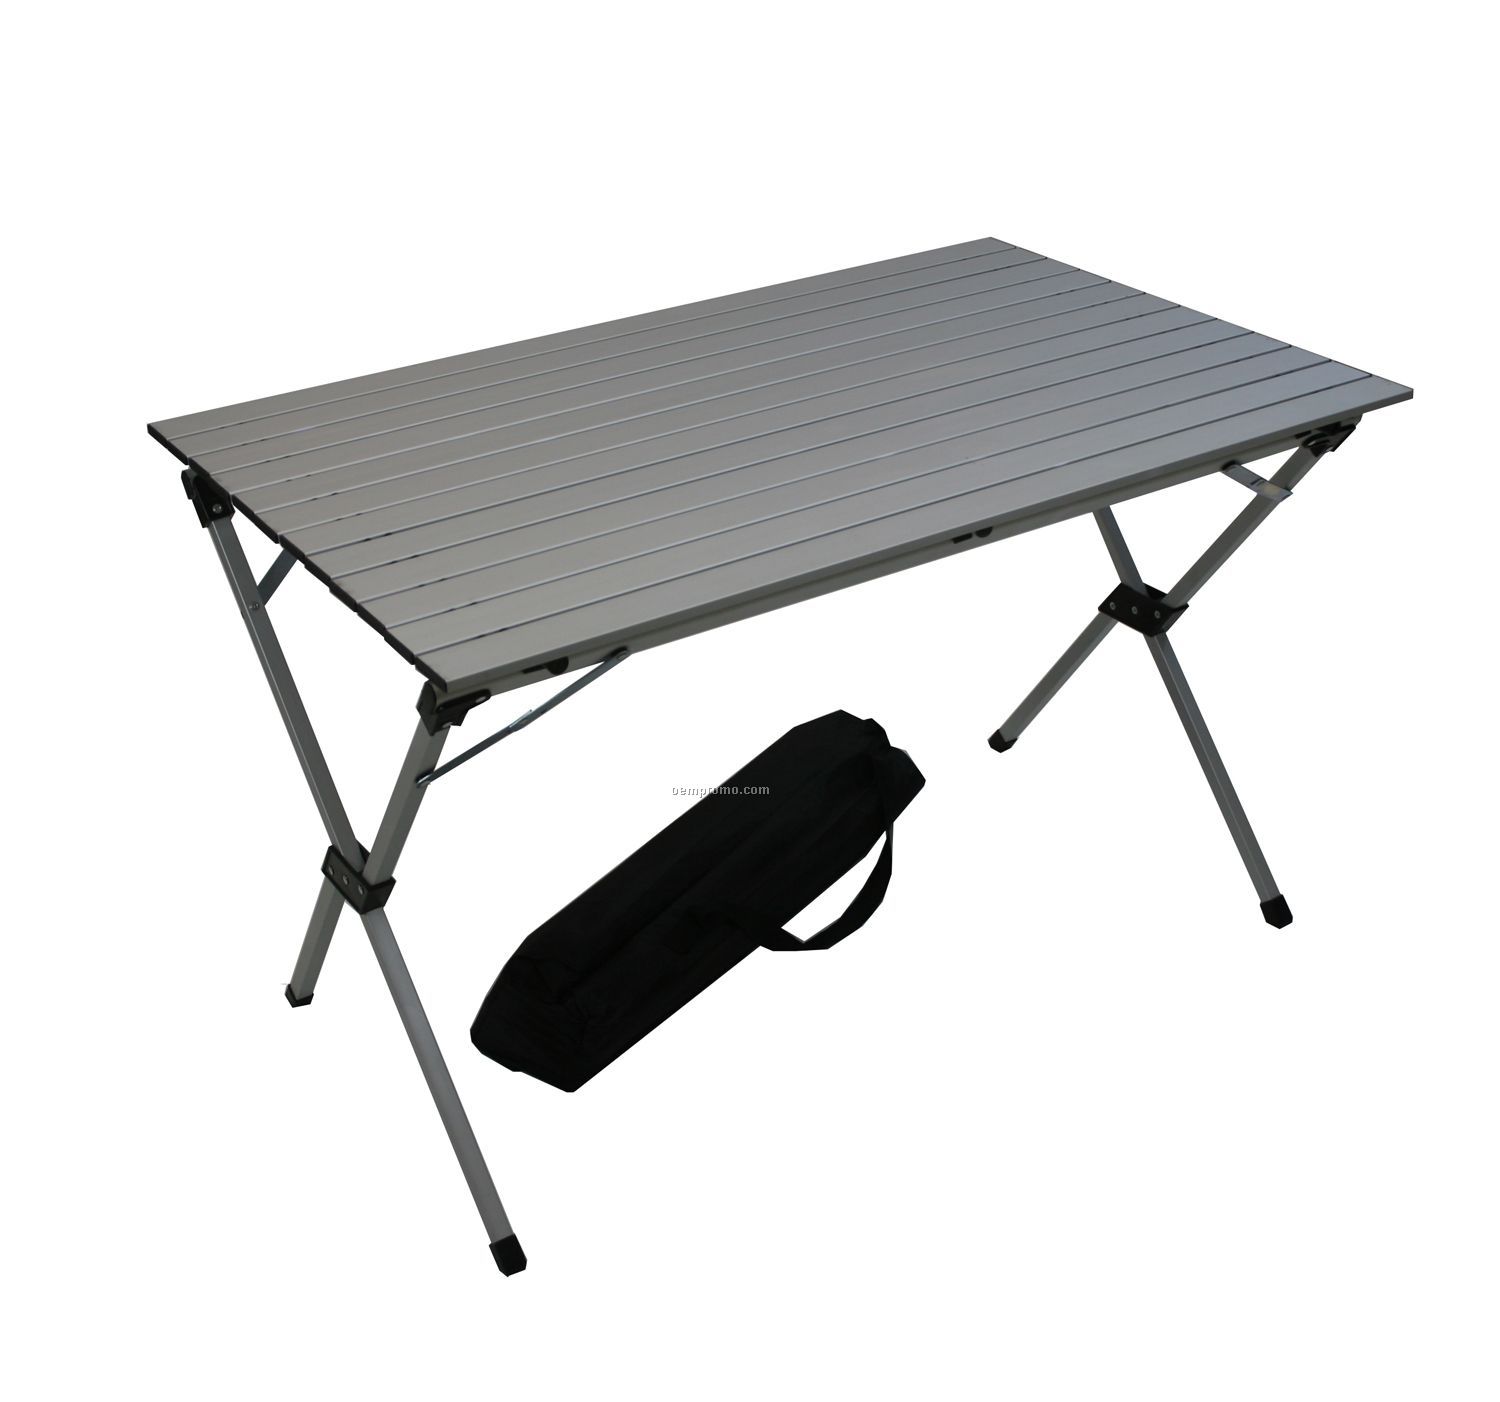 Large Picnic Aluminum Portable Table In A Bag (43